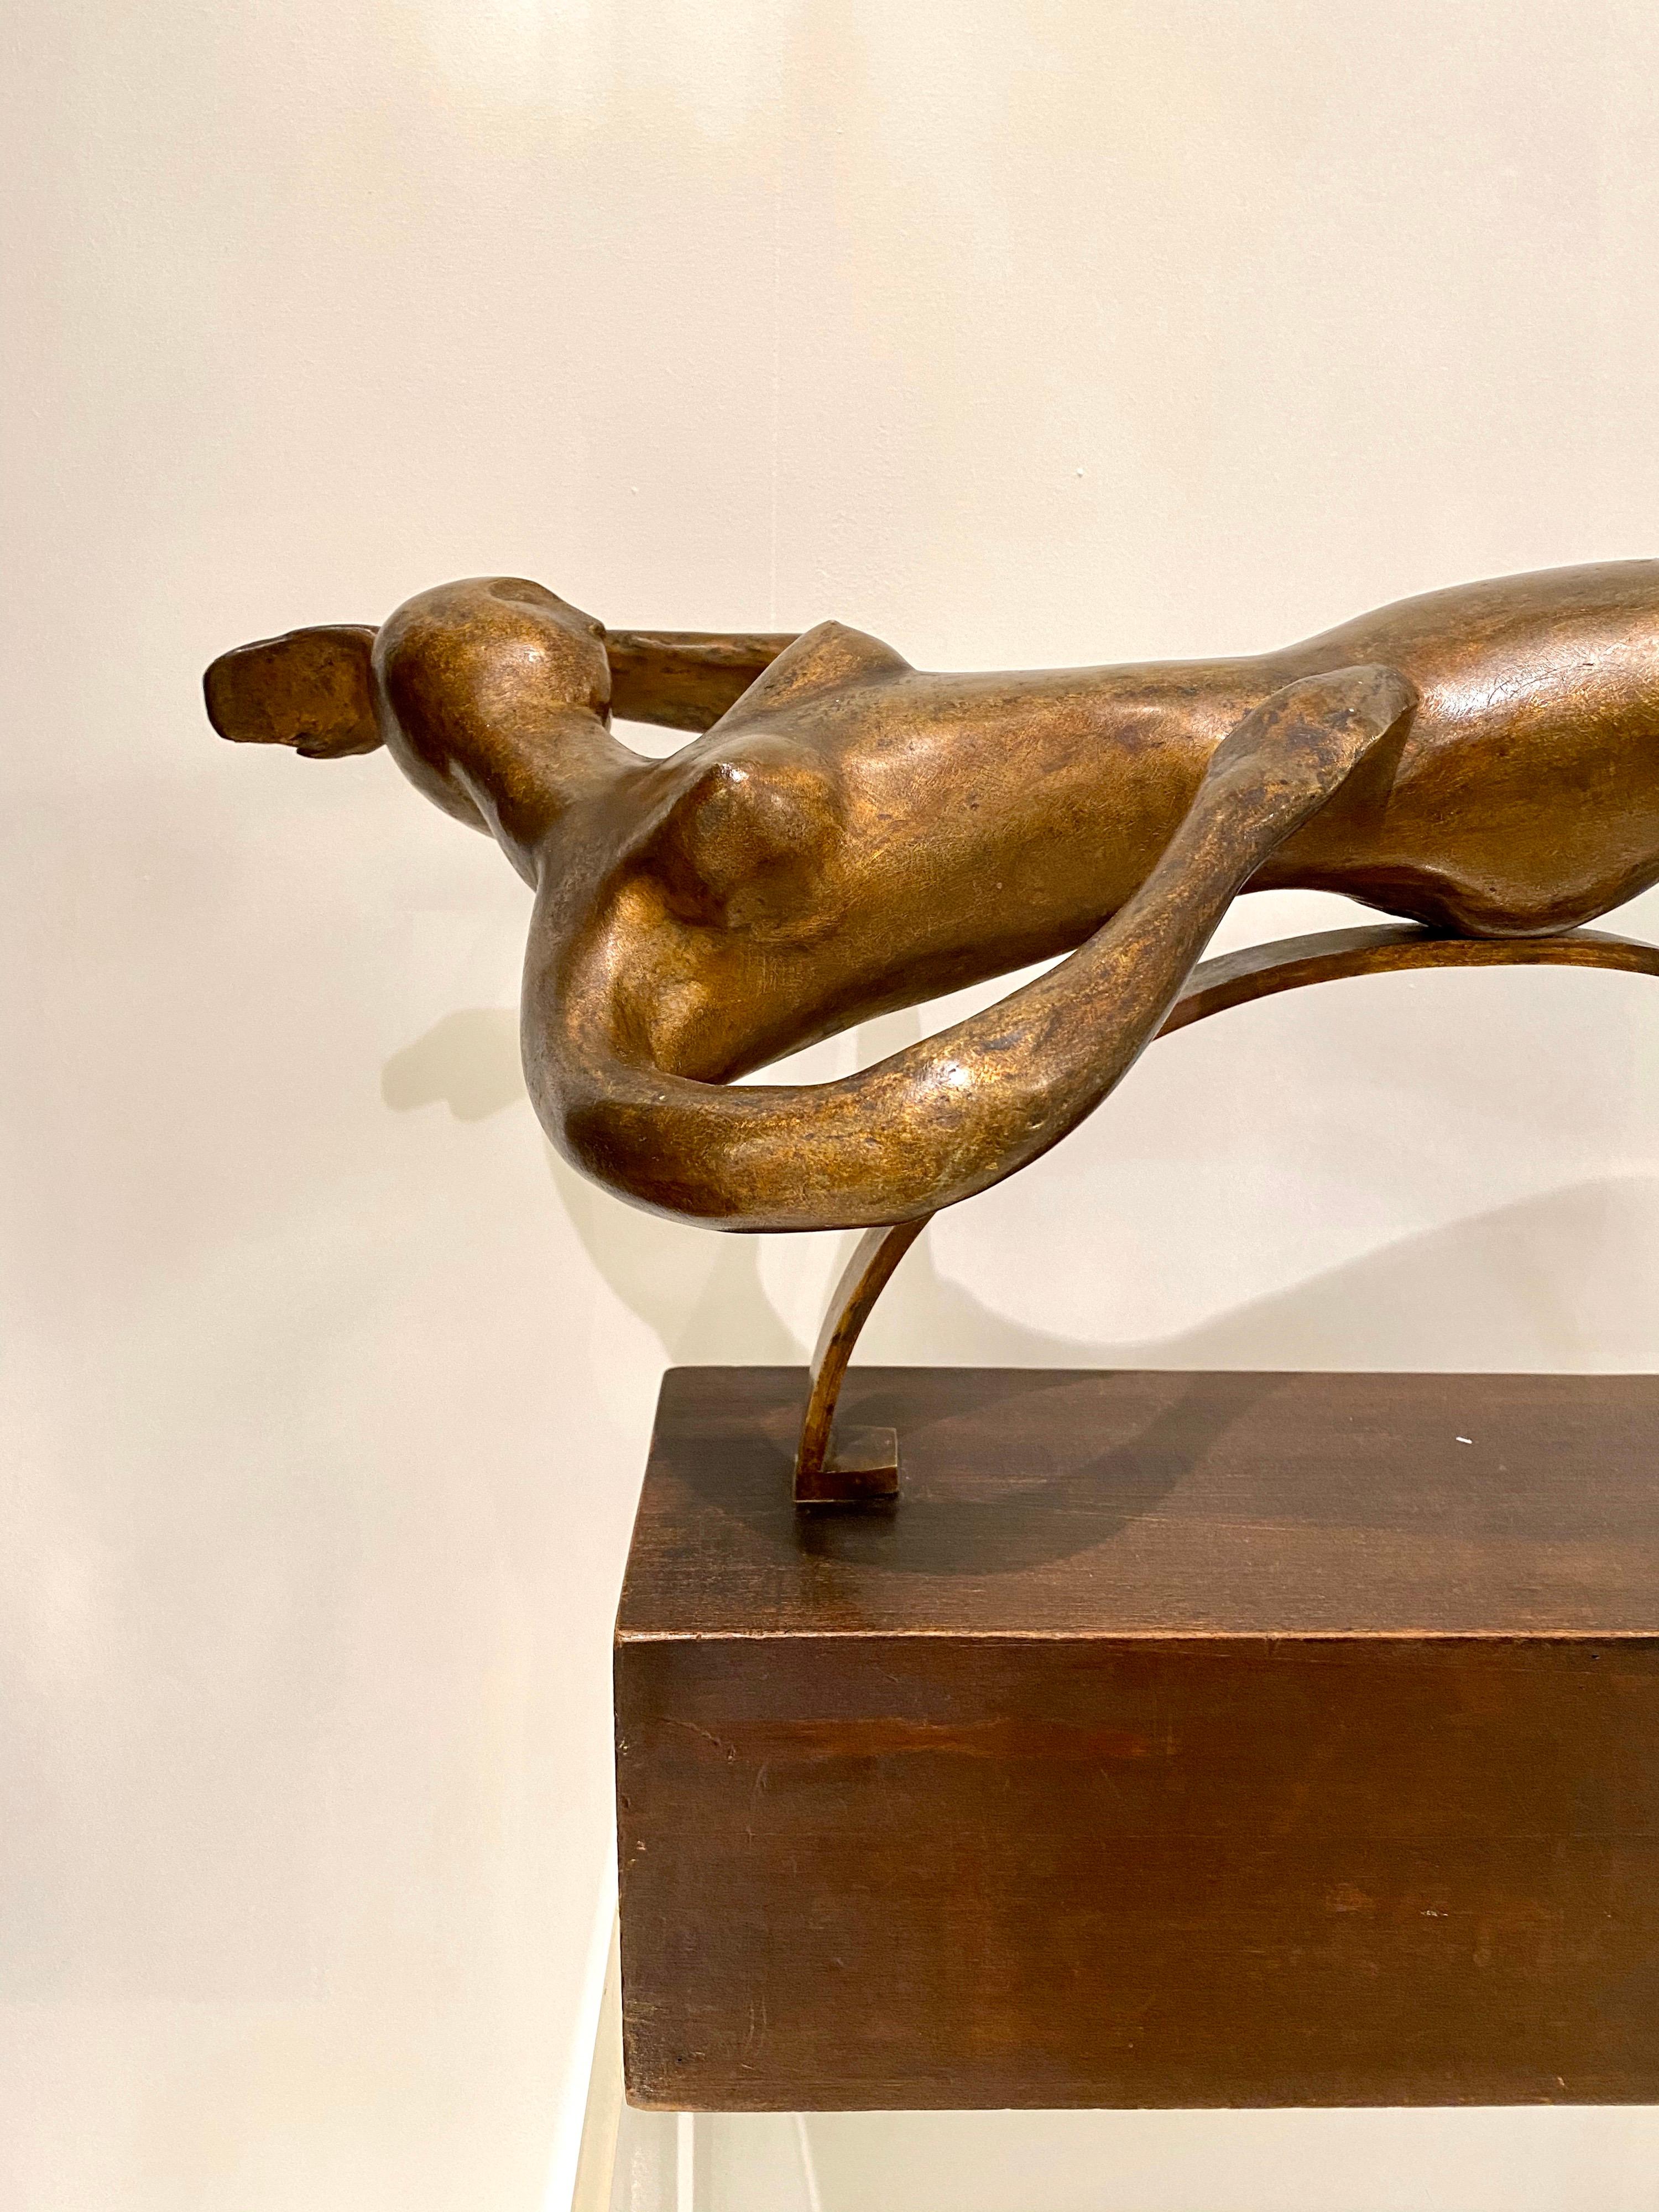 Bronze sculpture signed by the artist Ferdinand Parpan in 1953.
Between cubism and impressionism, glorification of woman body.